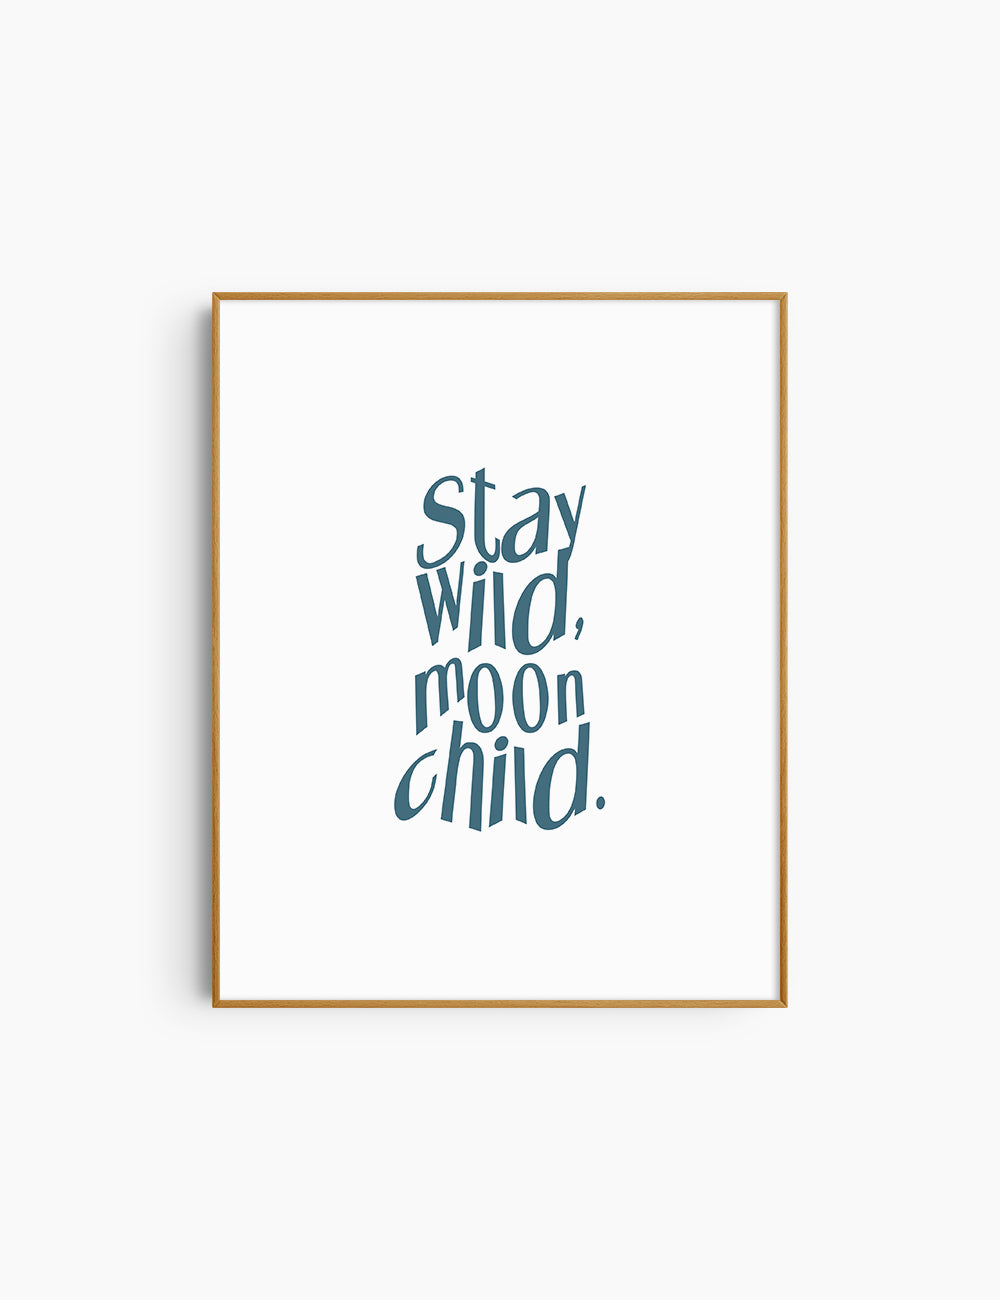 STAY WILD, MOON CHILD. Blue and White. Printable Wall Art Quote.